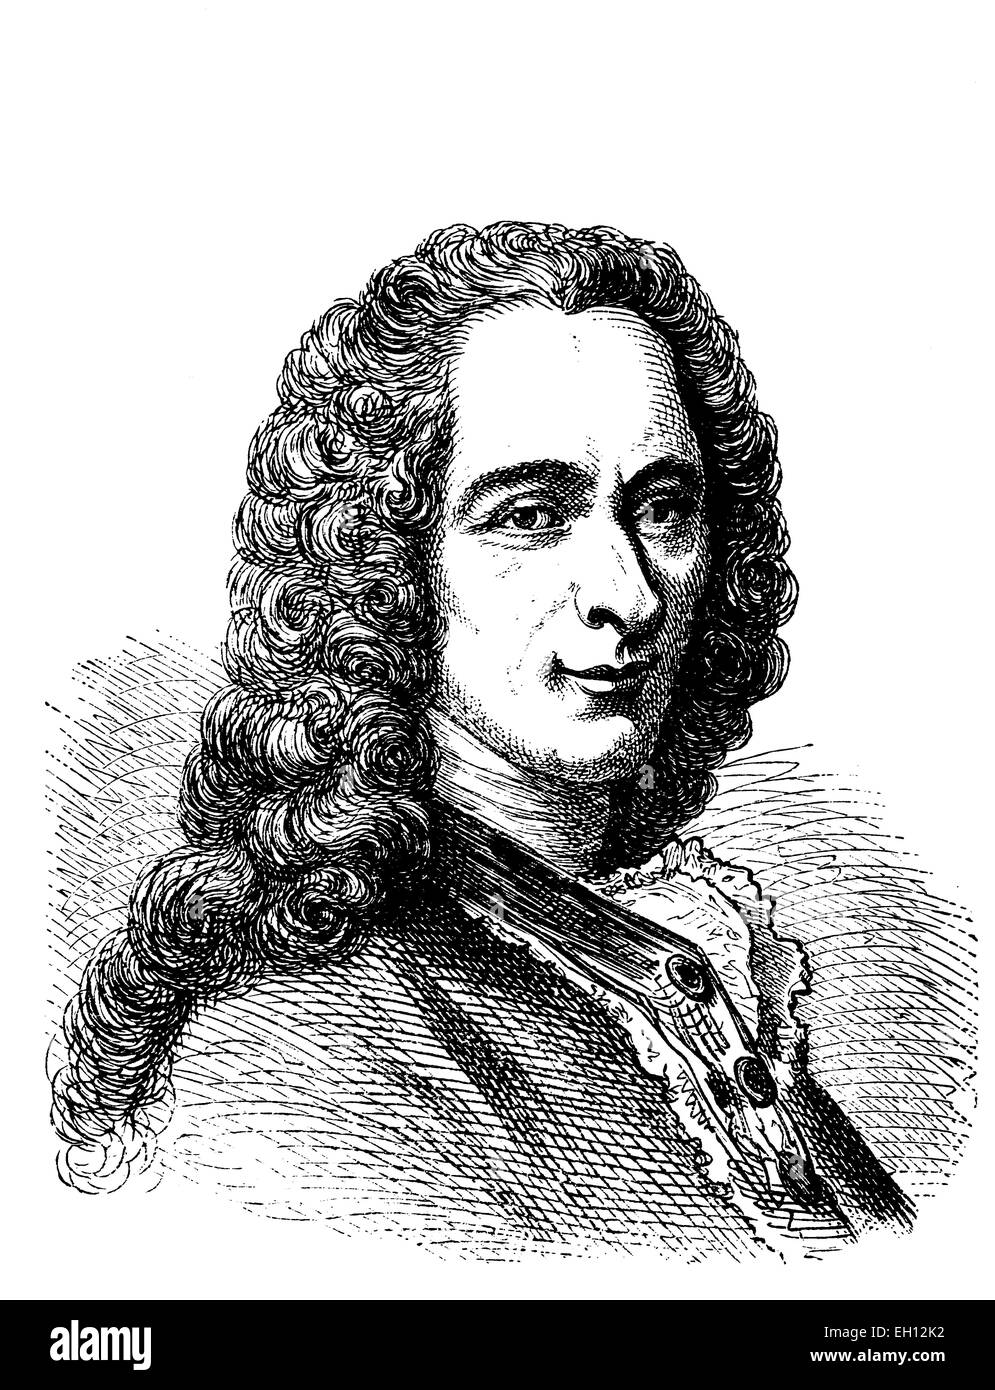 Francois Marie Voltaire, 1694 - 1778, French author, woodcut from 1880 Stock Photo